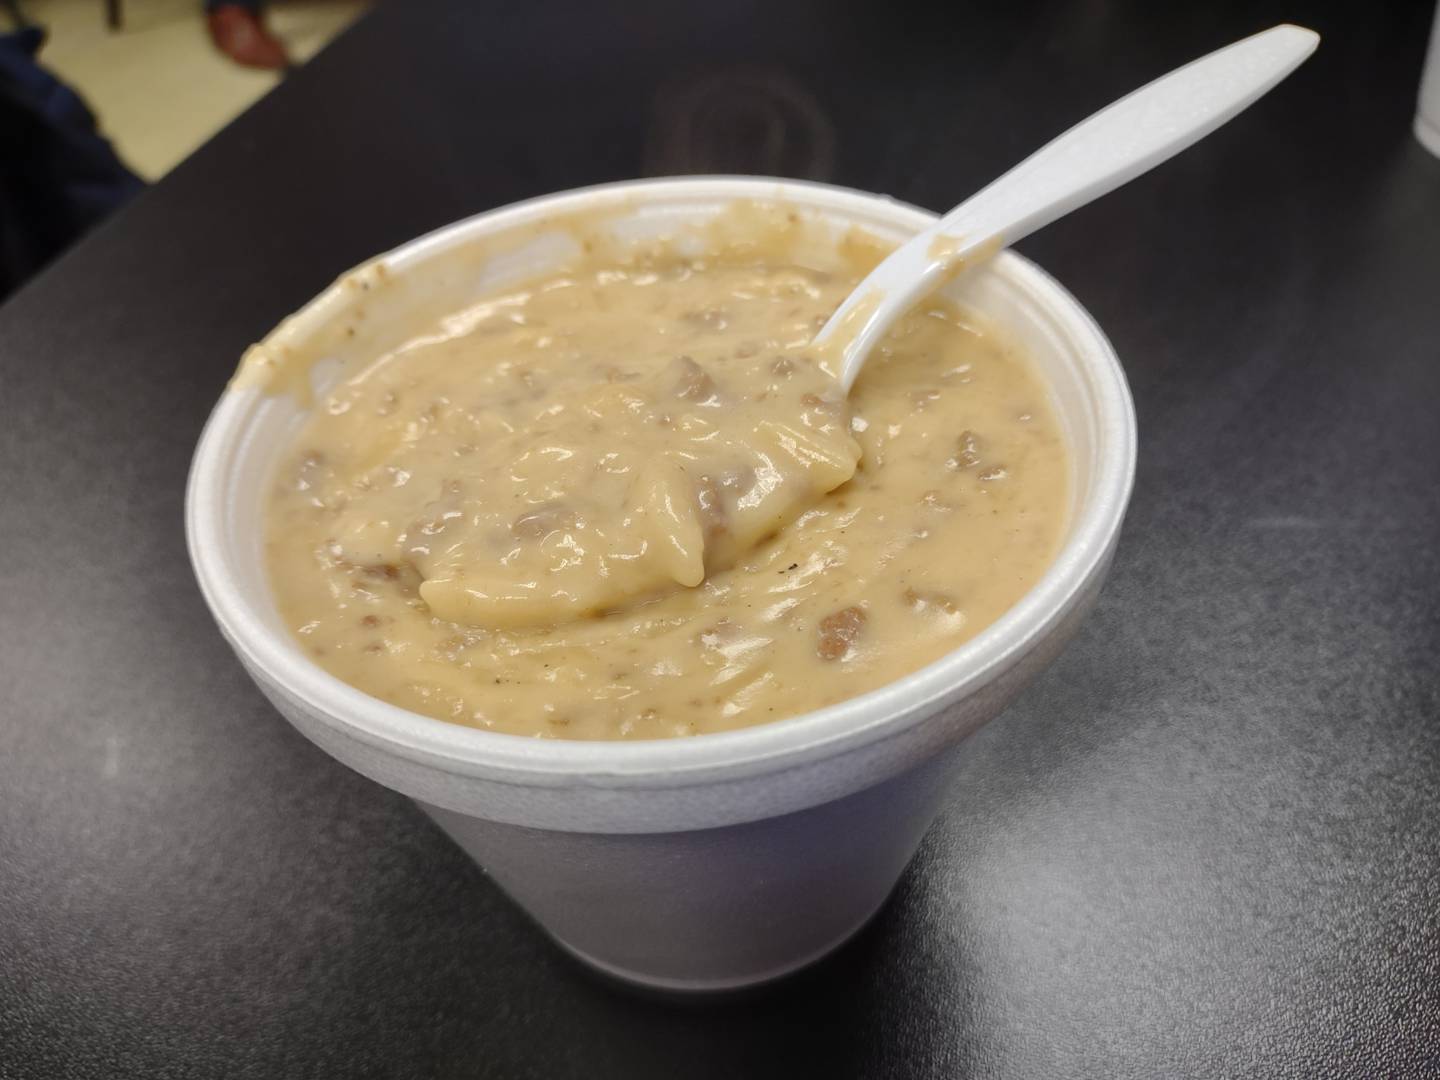 The cheeseburger soup at John's Place in Peru has a thick, creamy base and is stocked full of ground beef and noodle.